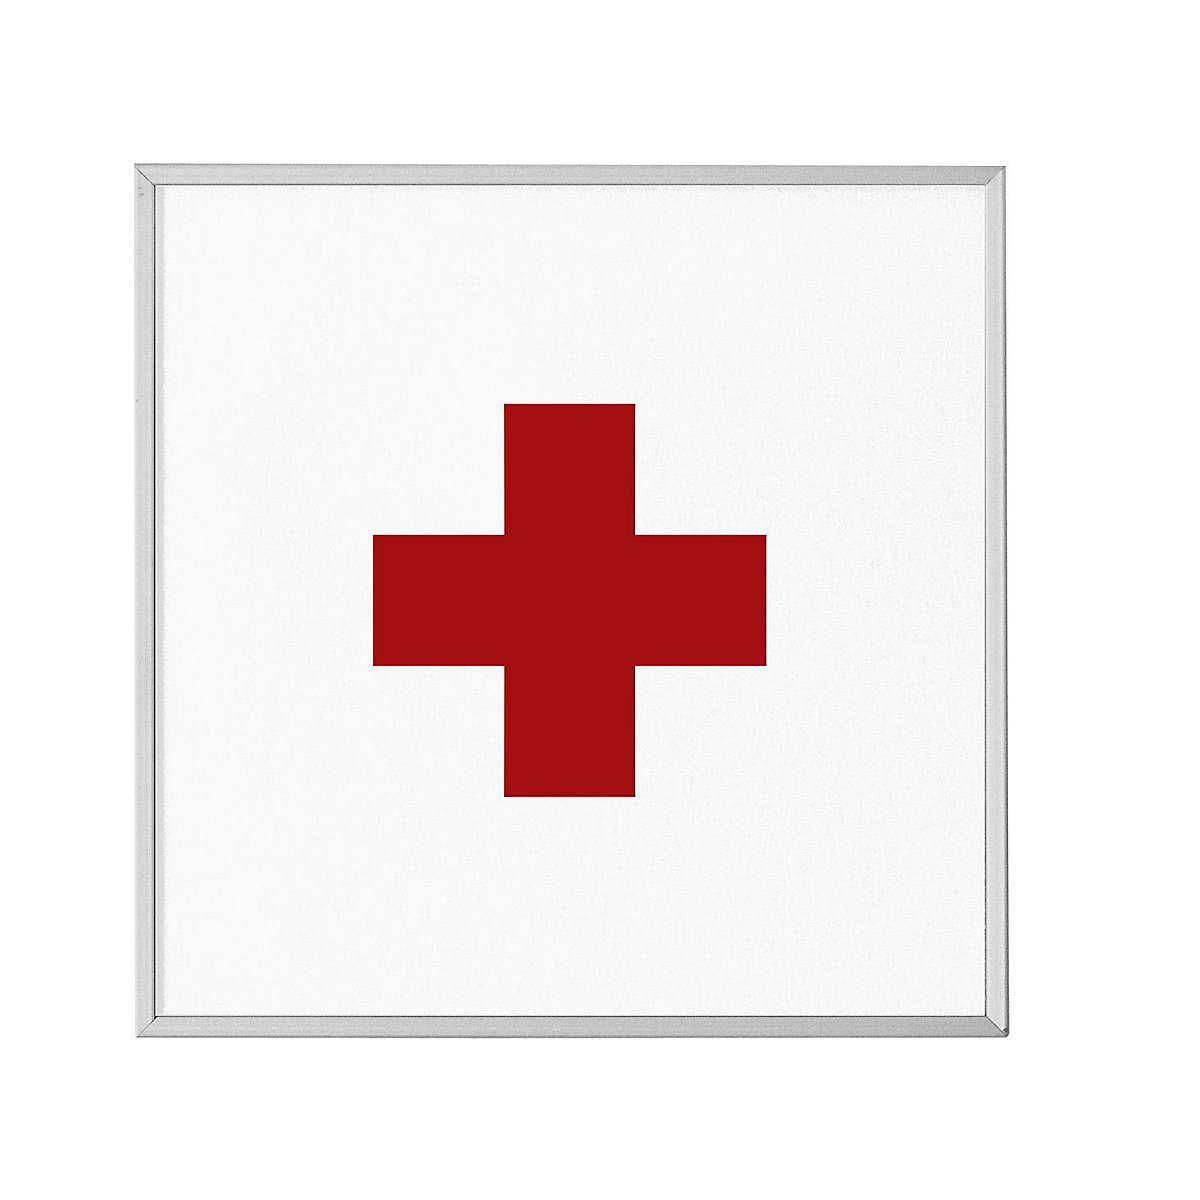 MADRID Silver Line™ door sign, pictogram HxW 120 x 120 mm, first aid-5